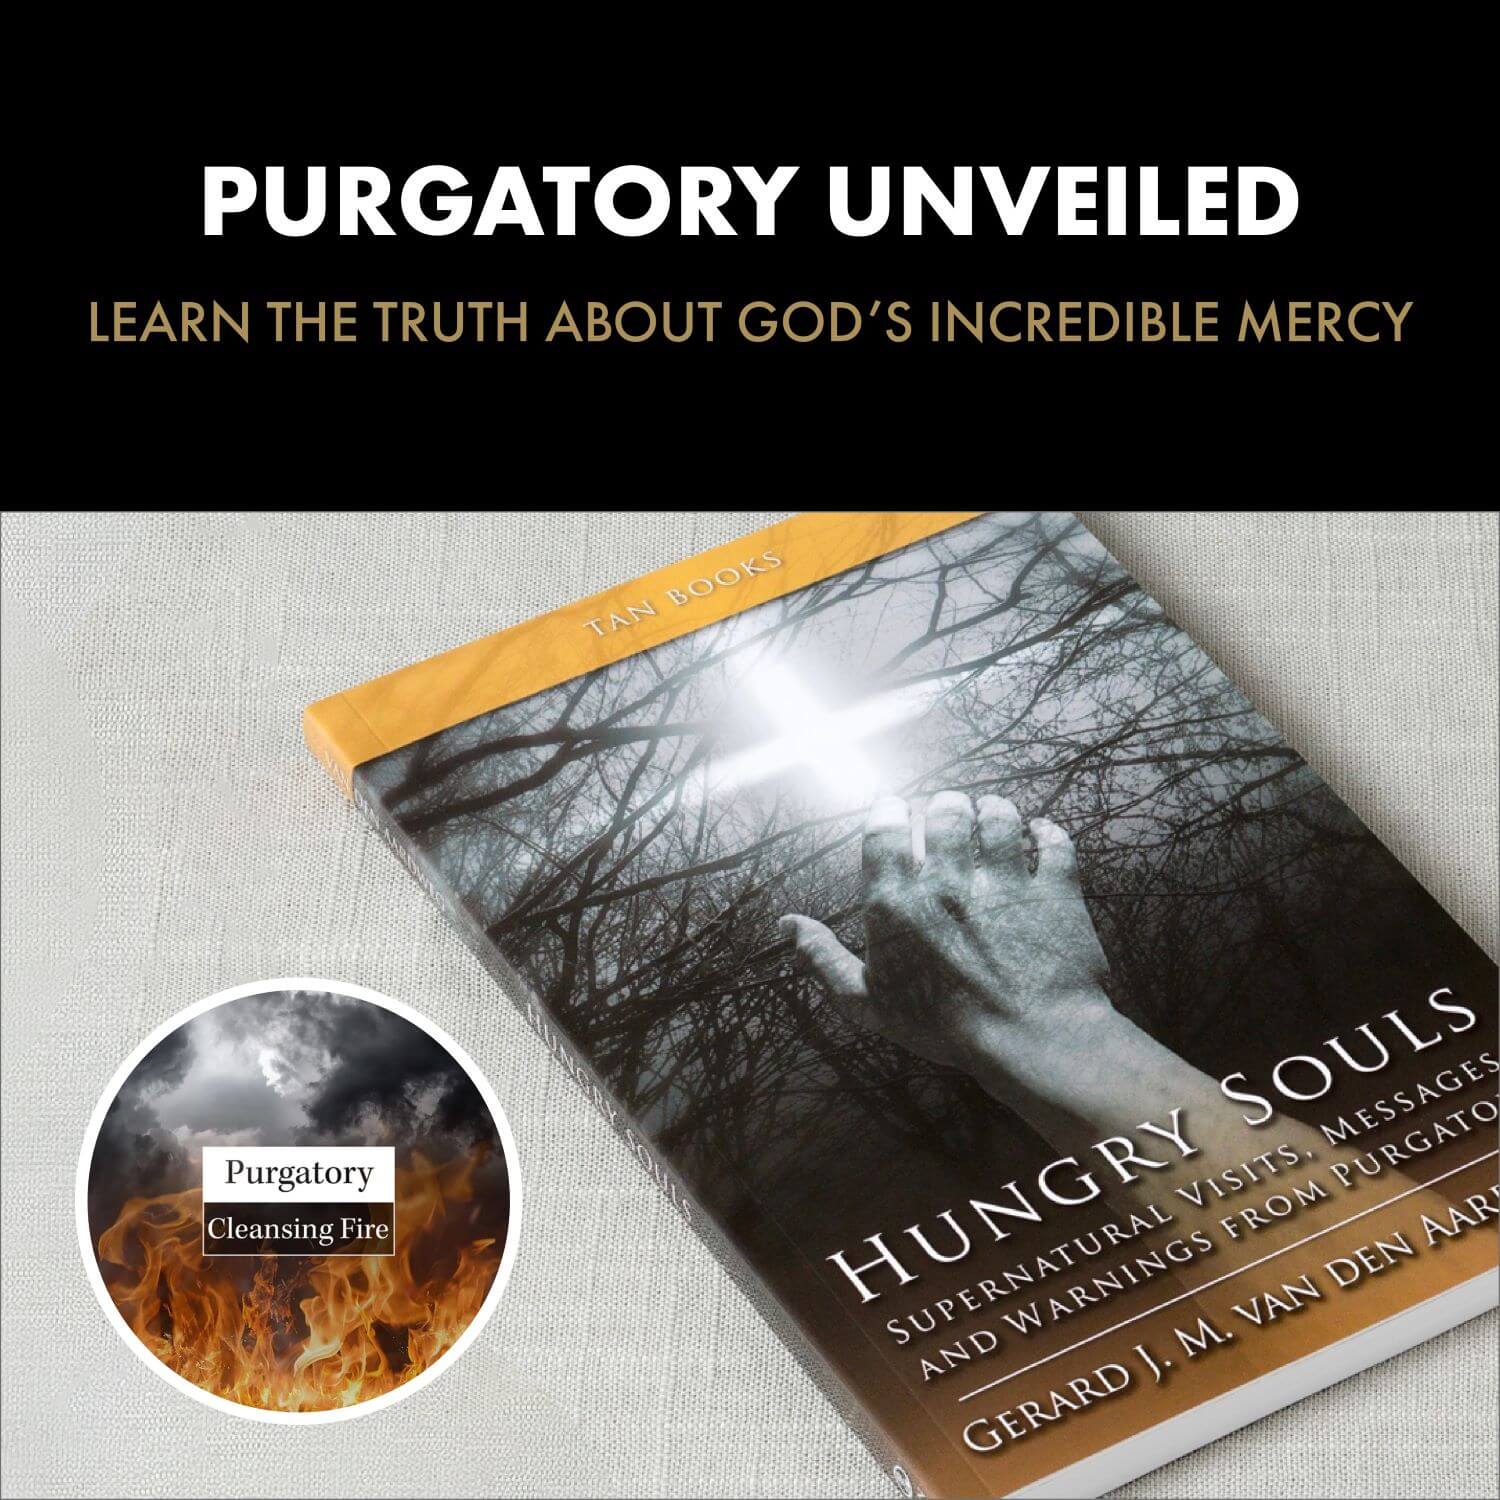 Purgatory Unveiled: Learn The Truth About God’s Incredible Mercy